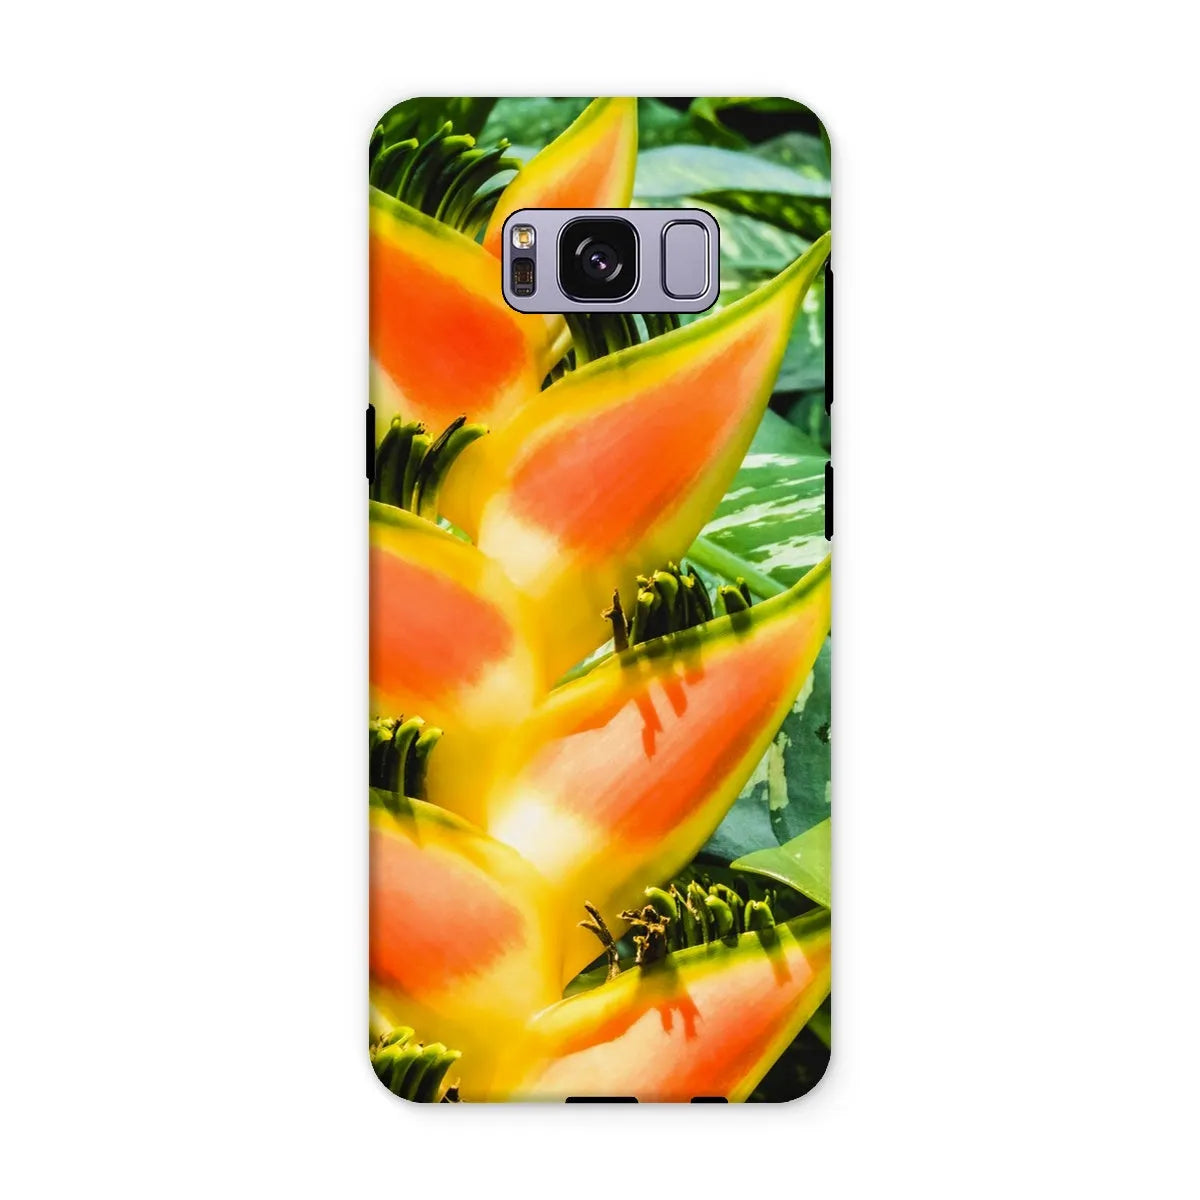 Showstopper Tough Phone Case - Samsung Galaxy S8 Plus / Matte - Mobile Phone Cases - Aesthetic Art